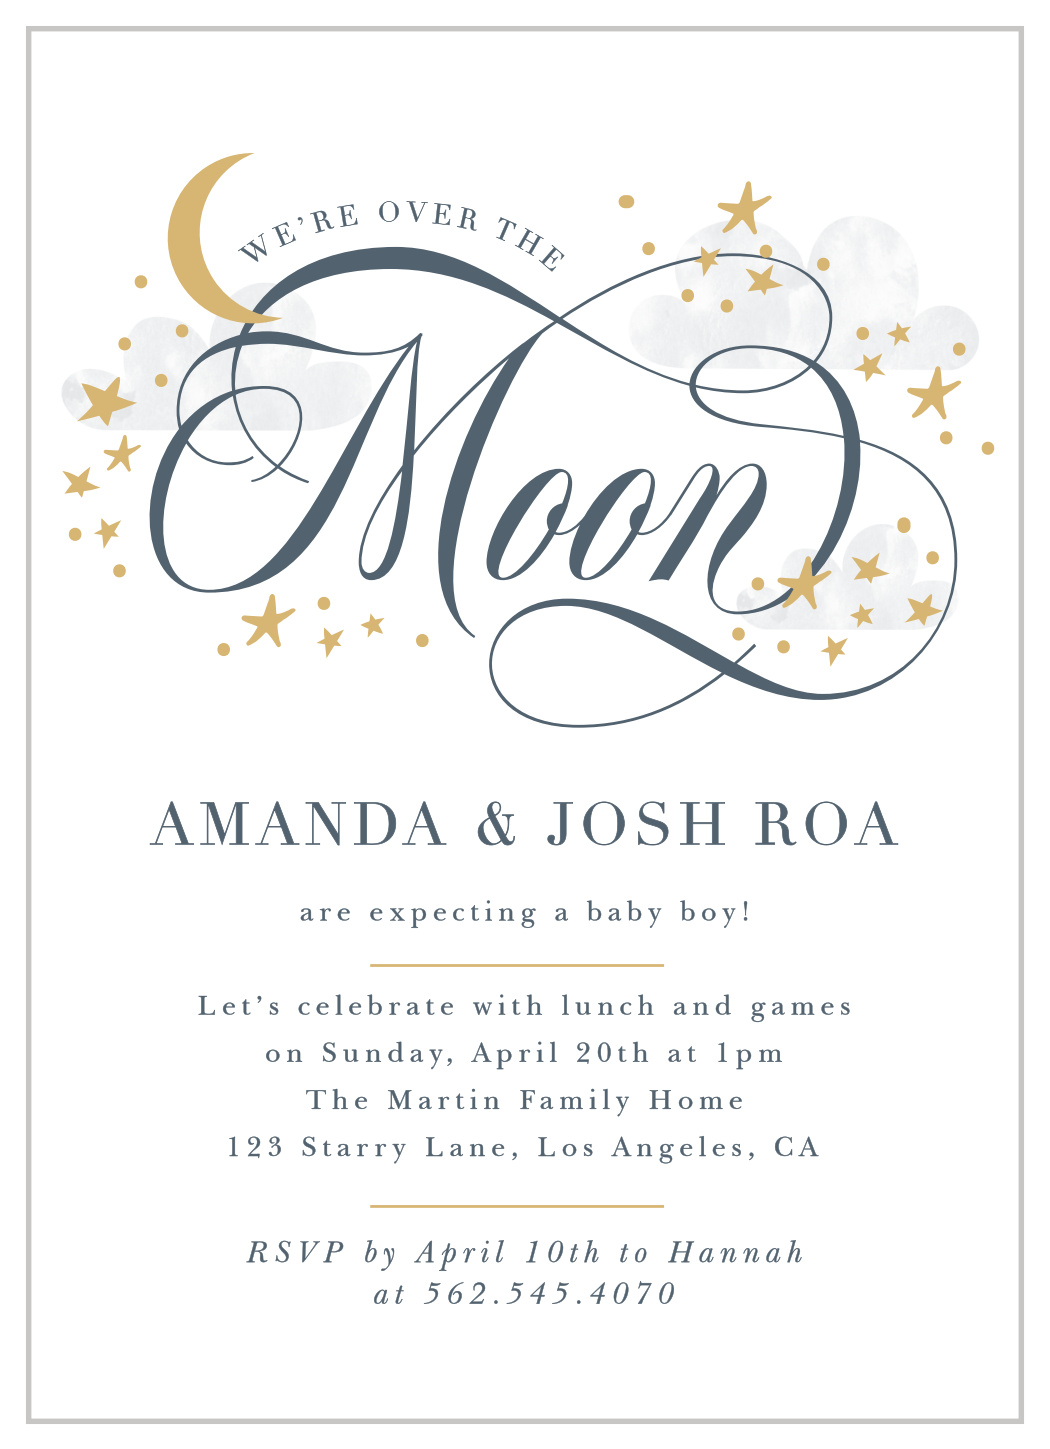 Airplane Design 20 Personalized Baby Shower Invitations 